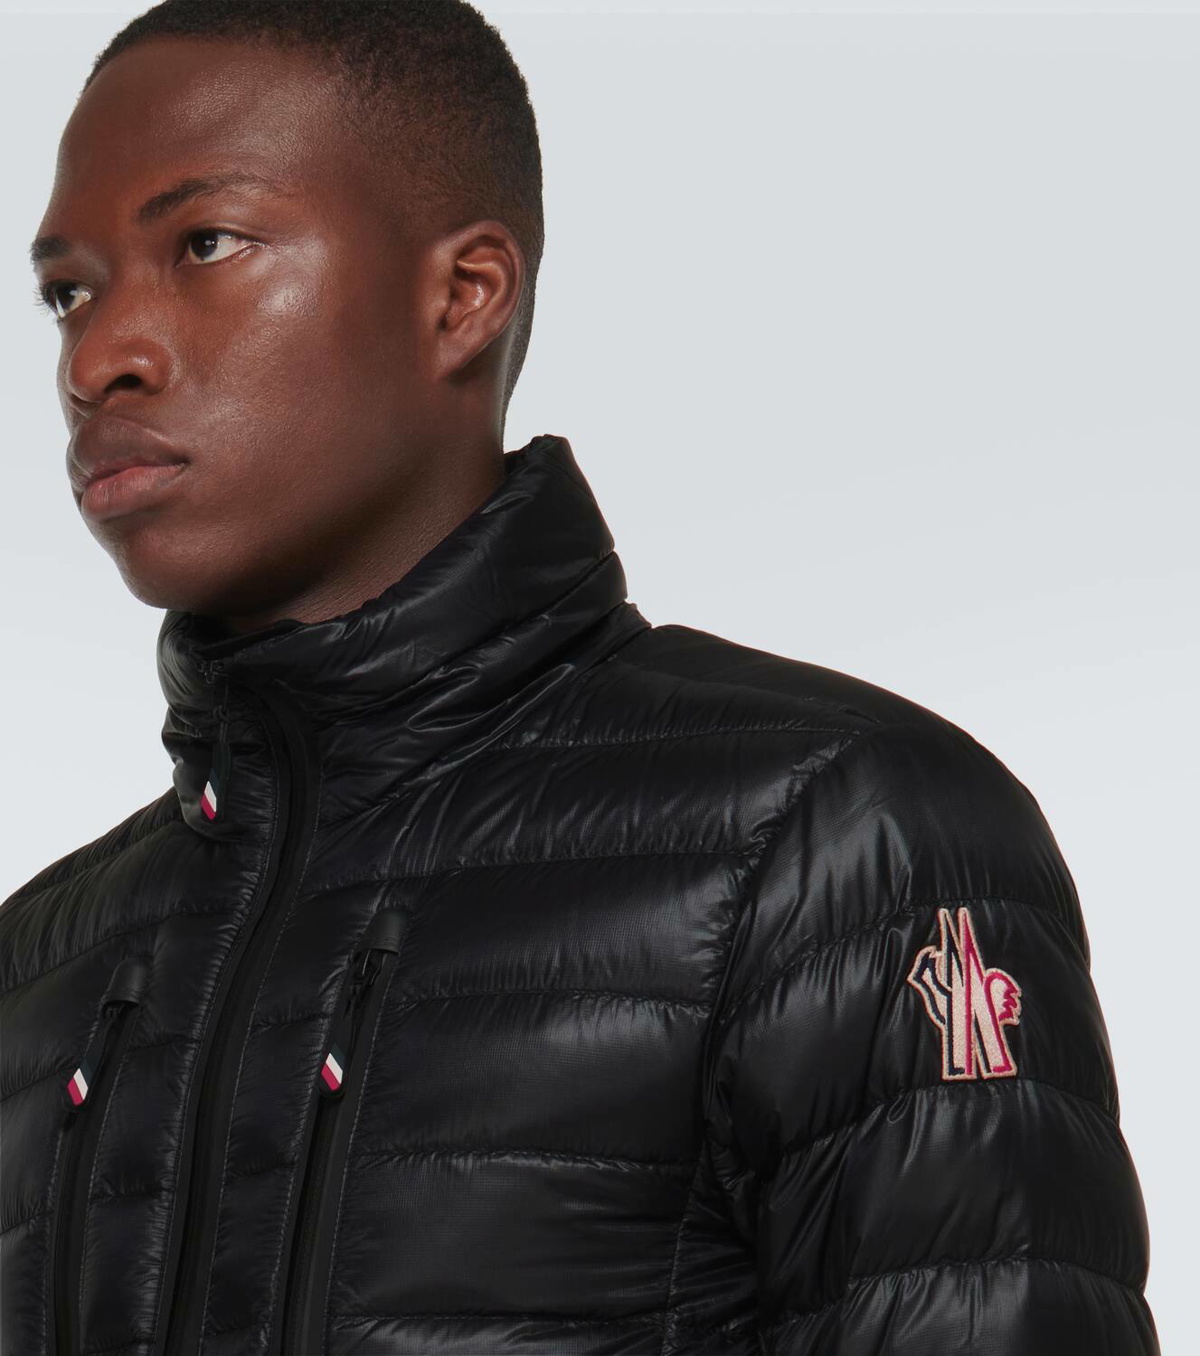 Hers Slim-Fit Logo-Appliquéd Quilted Shell Down Jacket